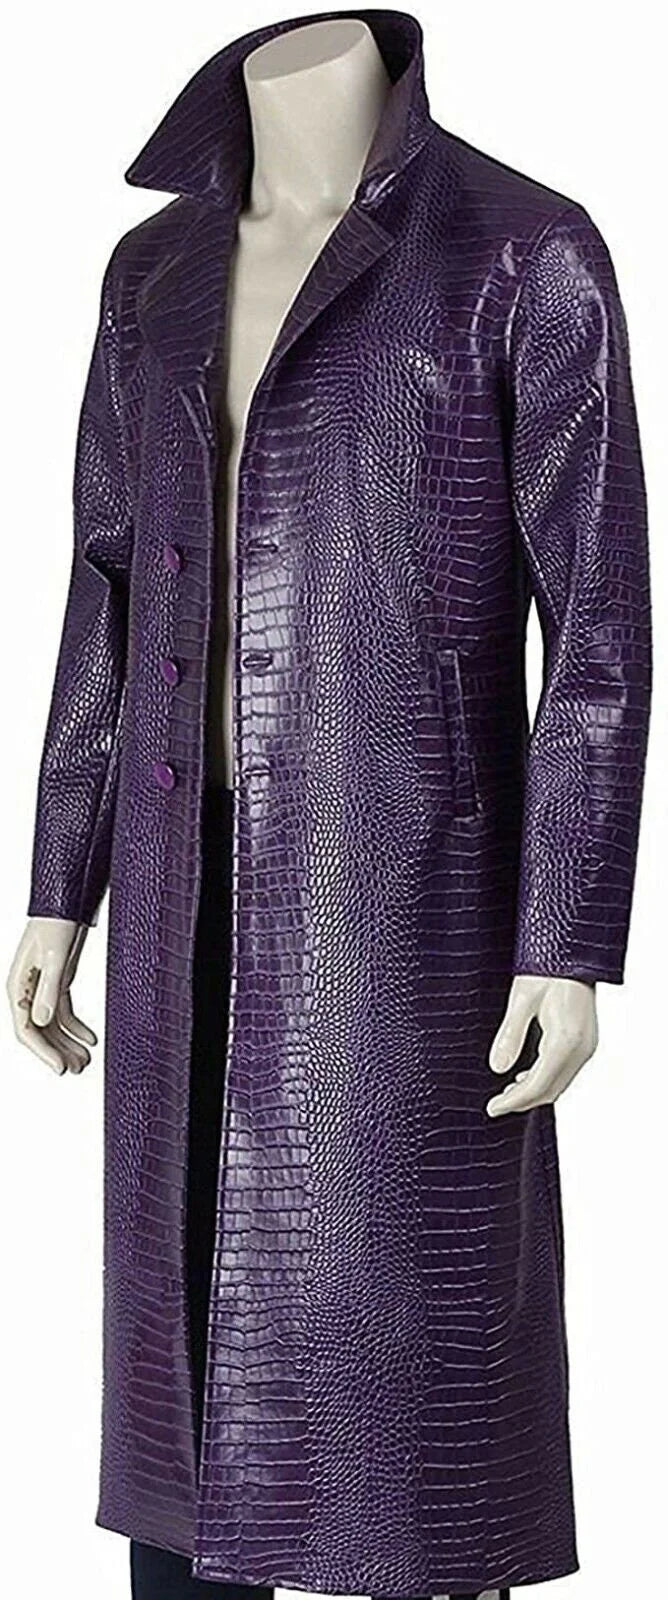 Joker Leather Coat, Jared Leto Purple Trench Coat, Suicide Squad Cosplay